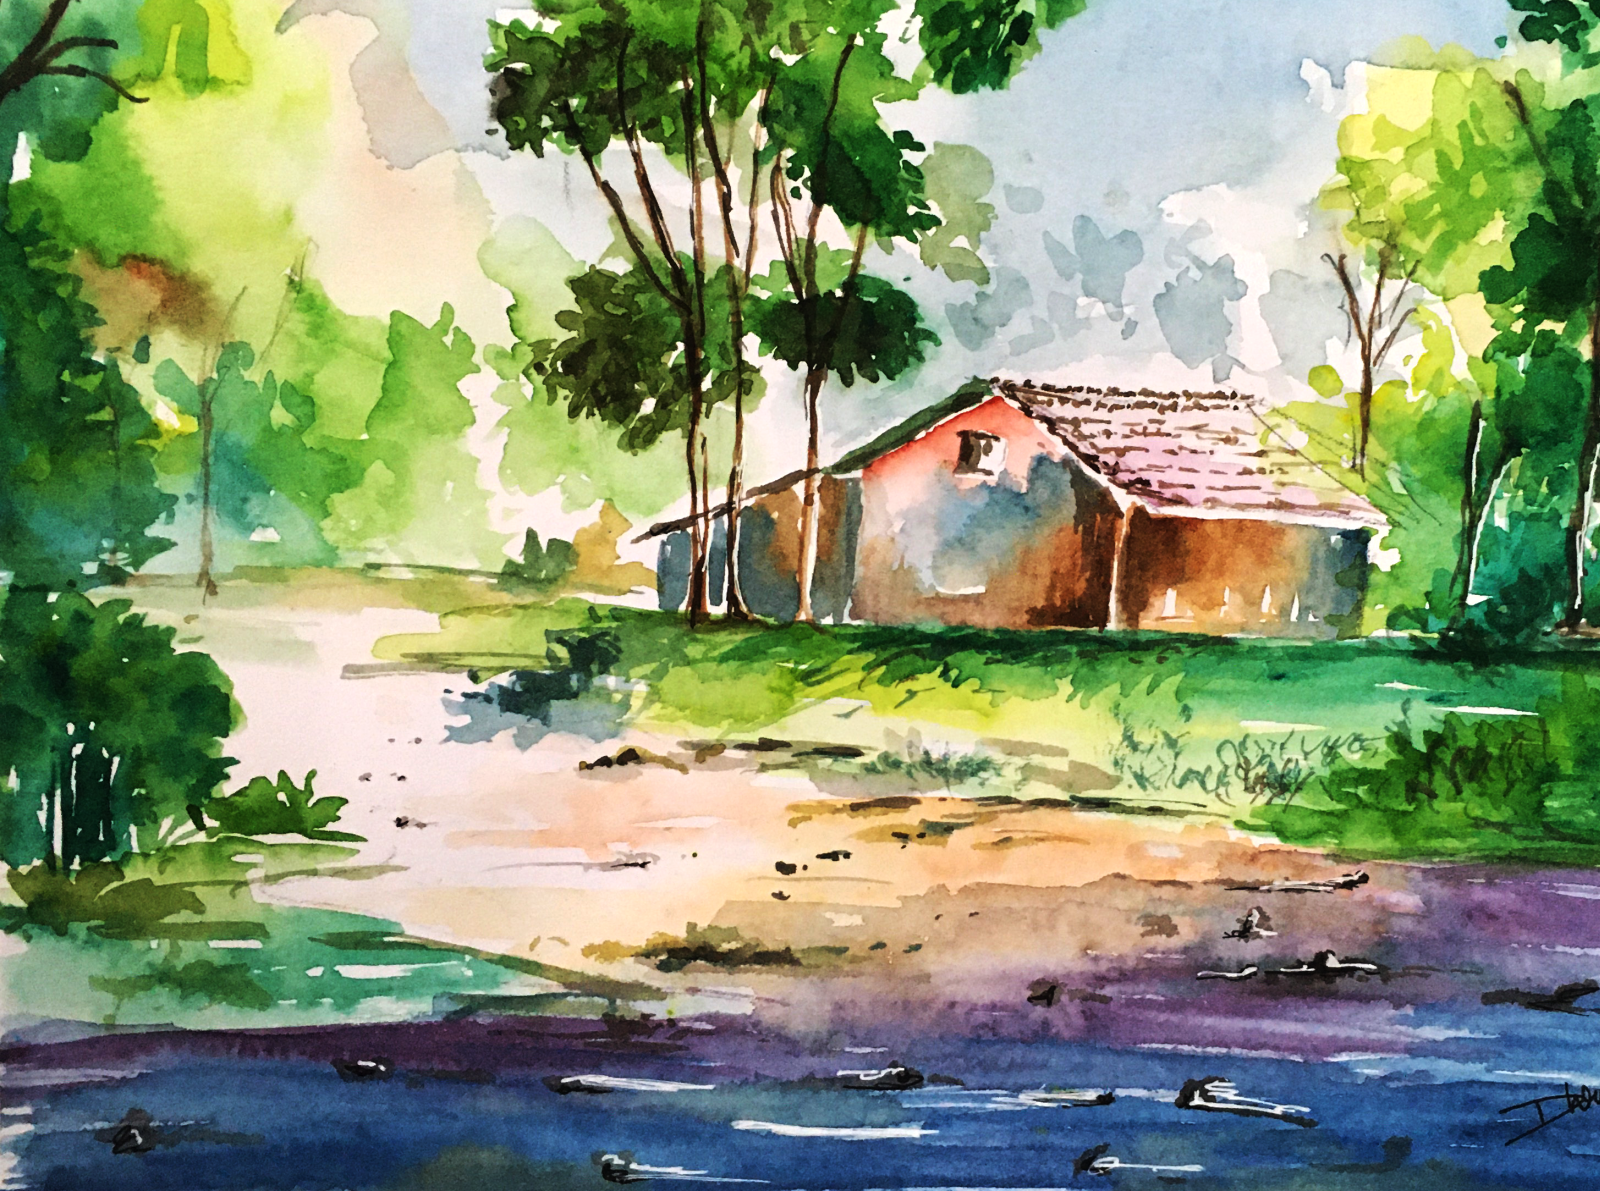 Landscape - Water Color Painting by Dhruvi Sharma on Dribbble